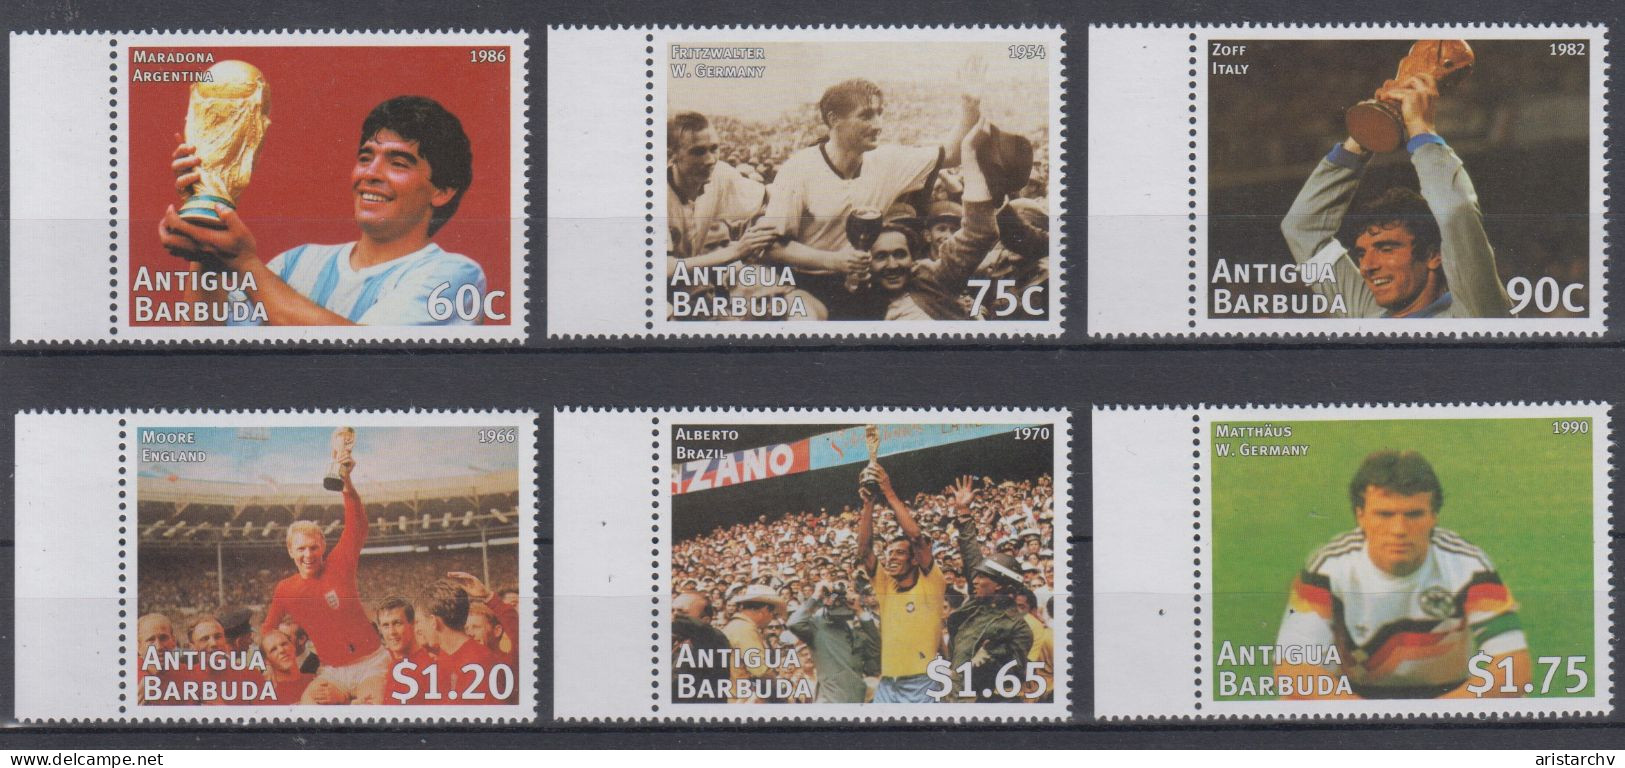 ANTIGUA BARBUDA 1998 FOOTBALL WORLD CUP 2 S/SHEETS SHEETLET AND 6 STAMPS - 1998 – Frankreich